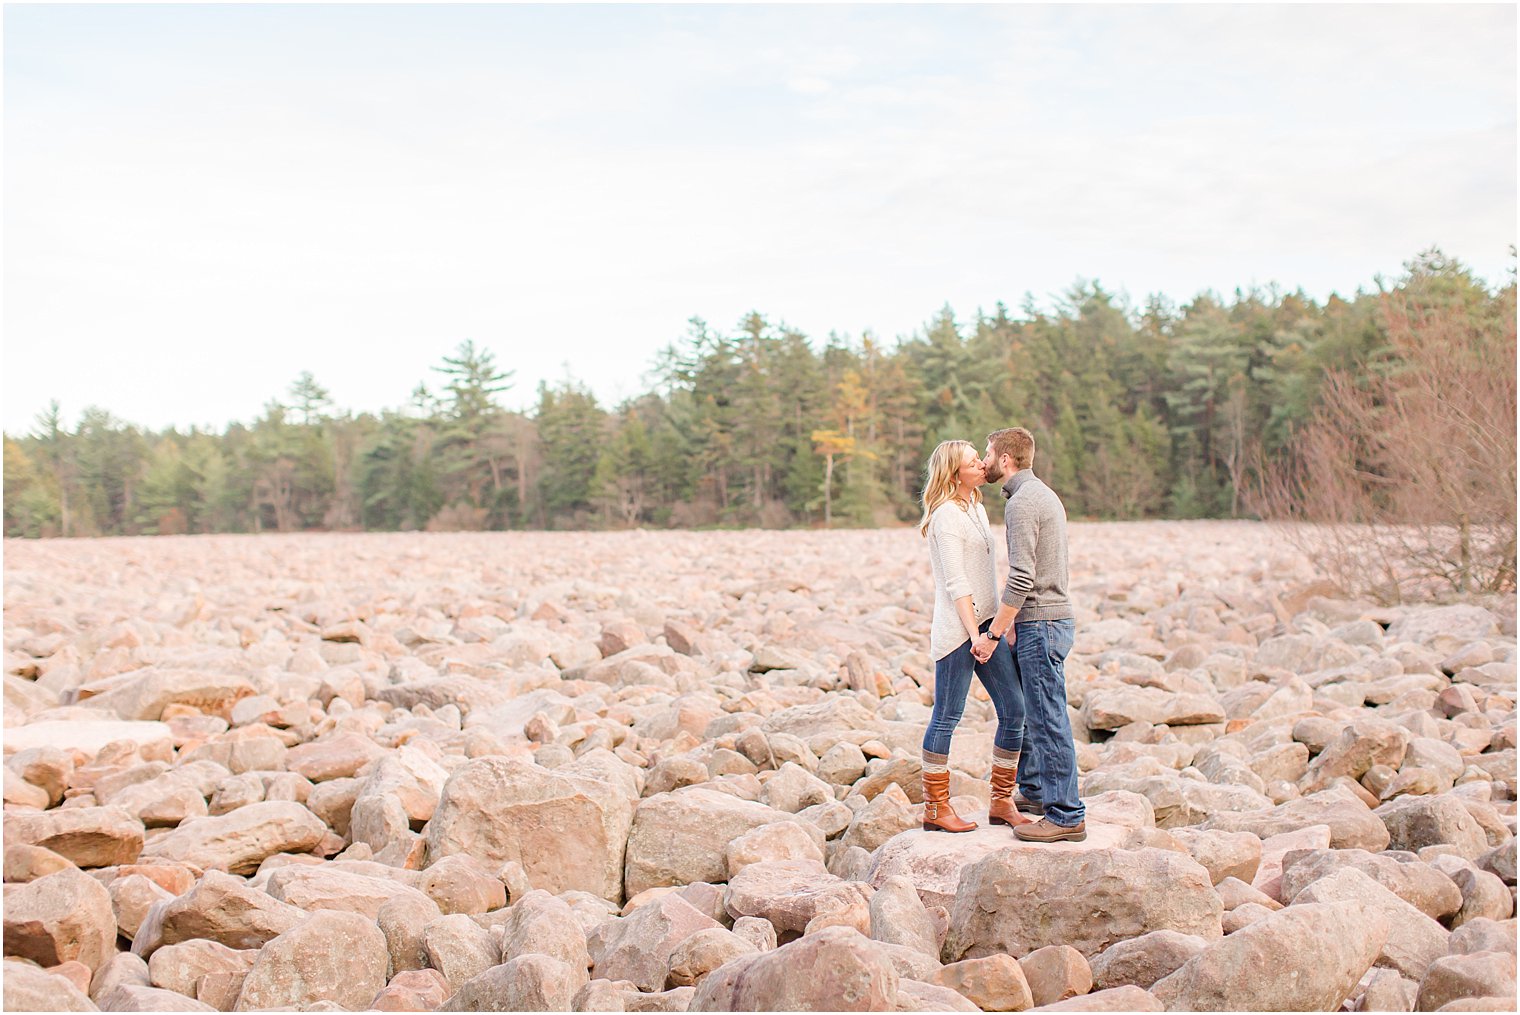 Casual and authentic engagement photos